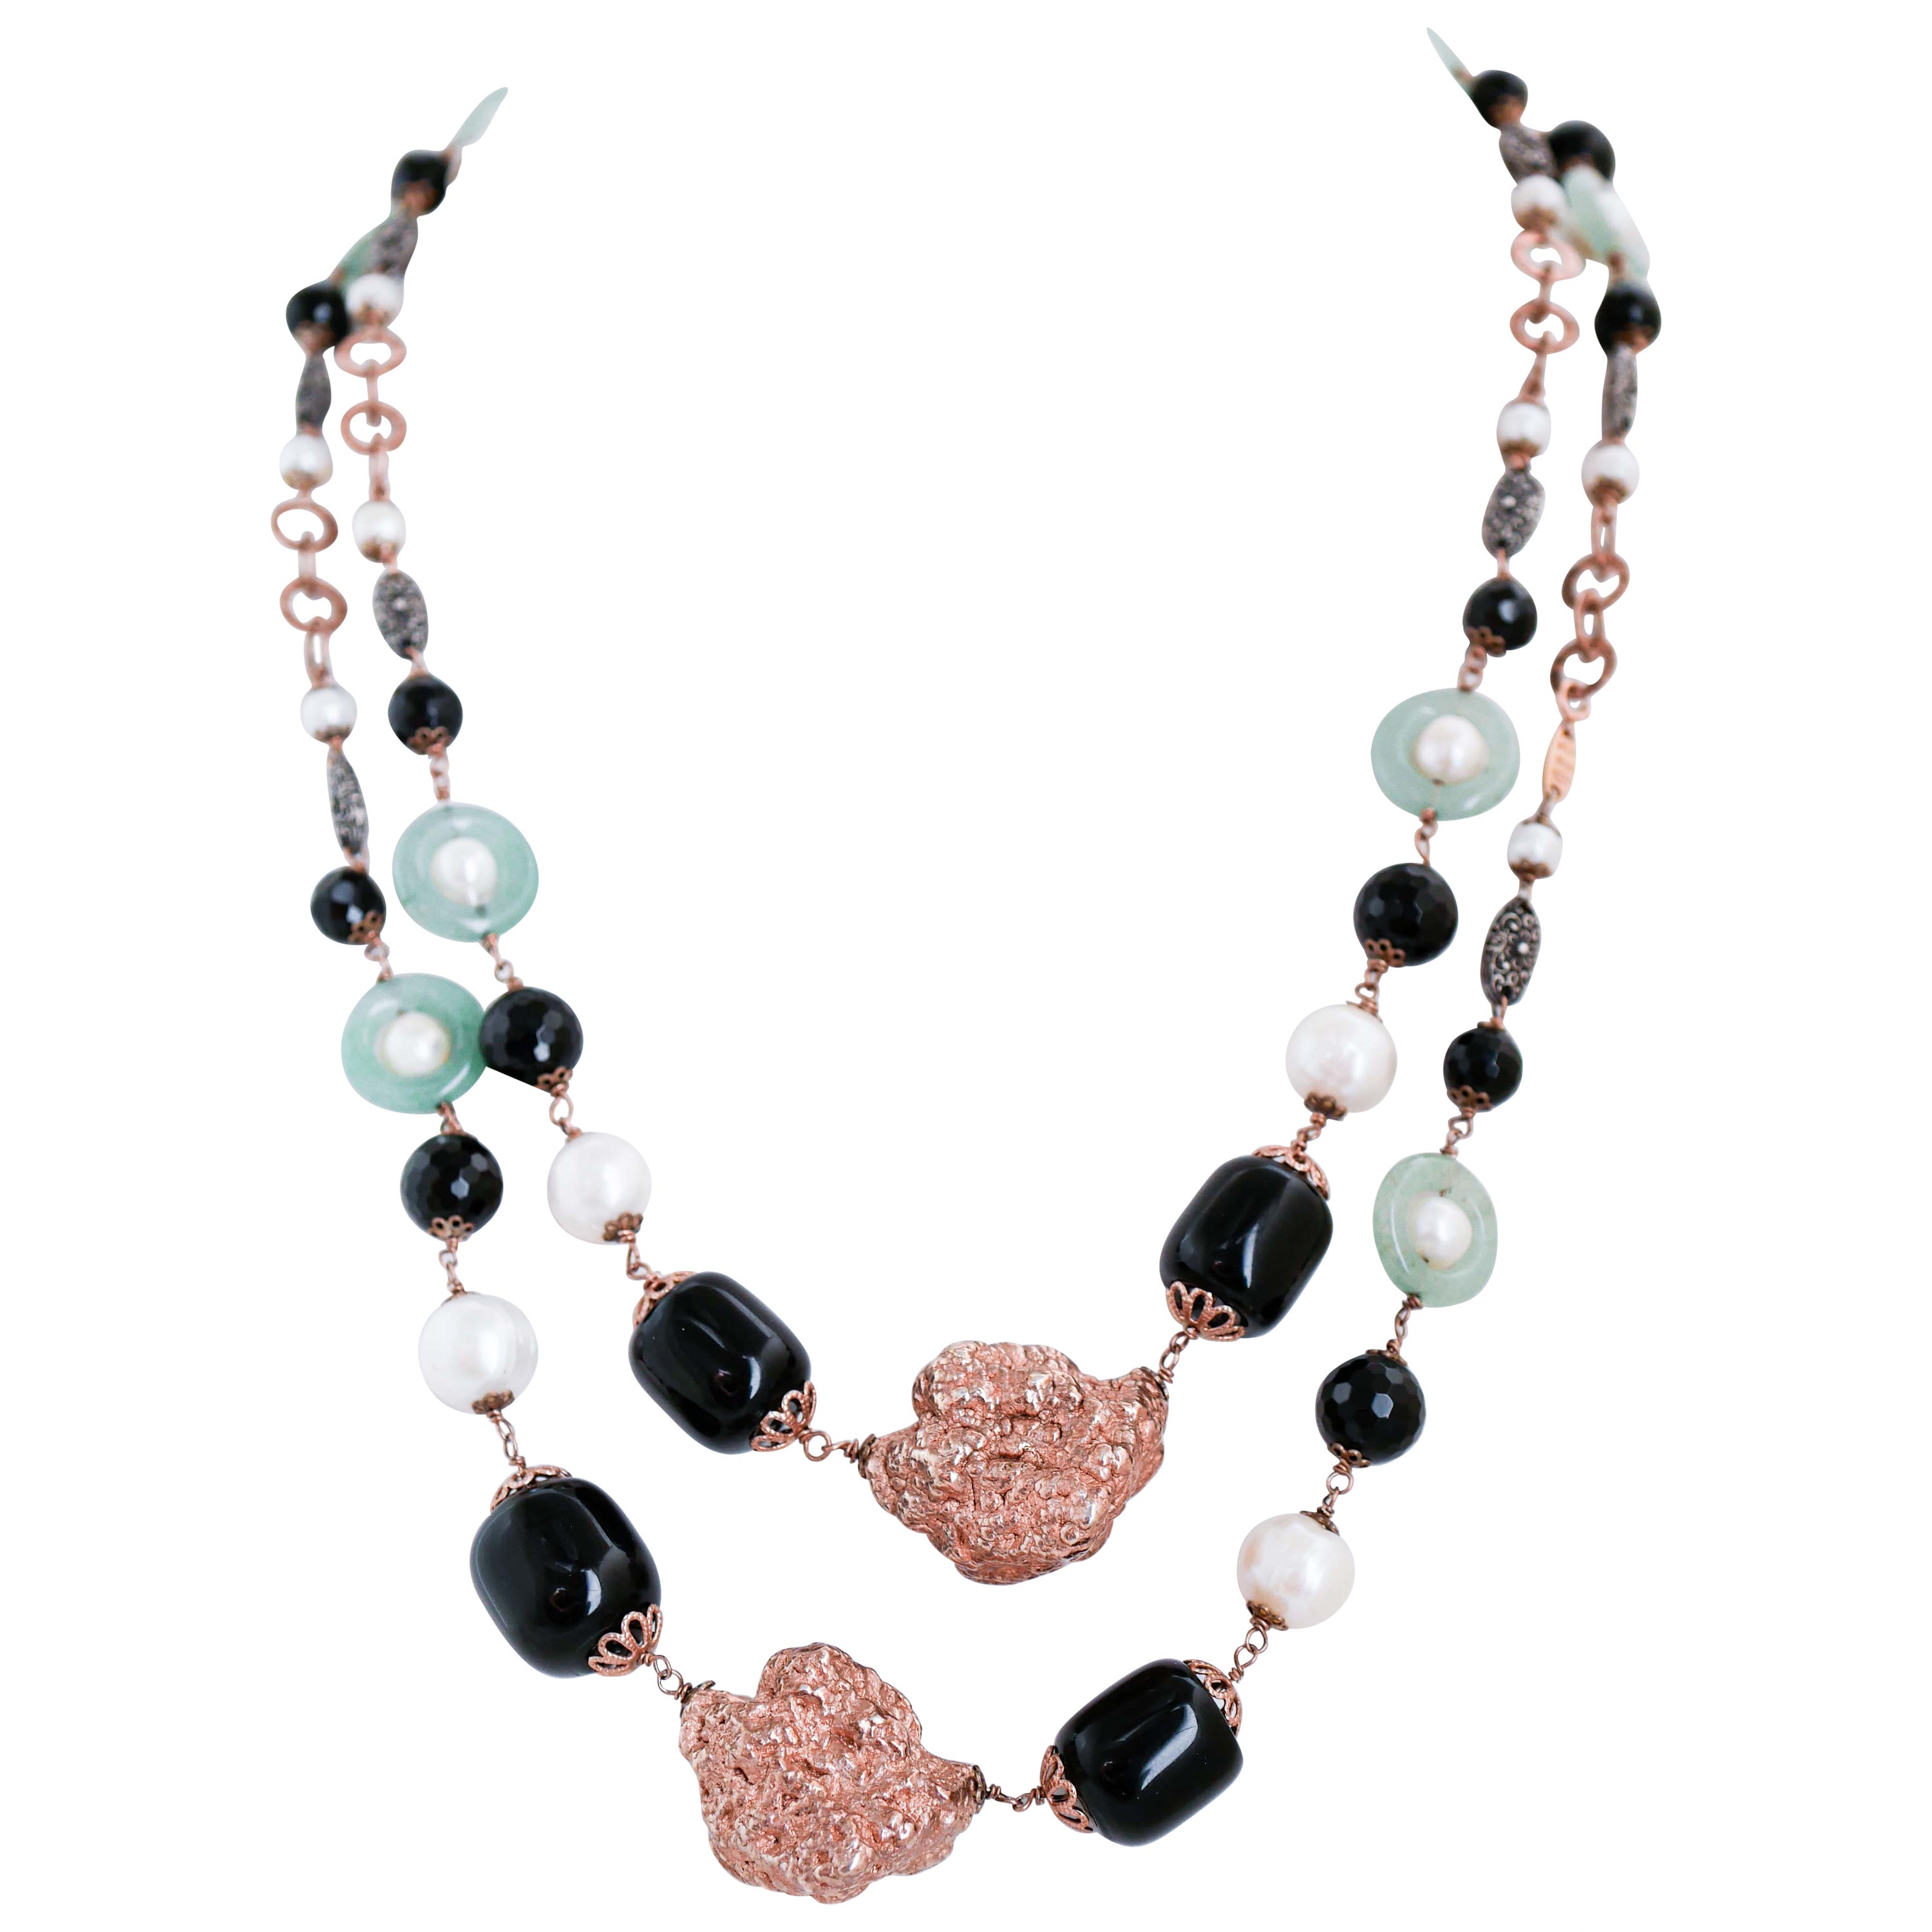 Onyx, Jade Pearls, Rose Gold and Silver Retrò Necklace. For Sale